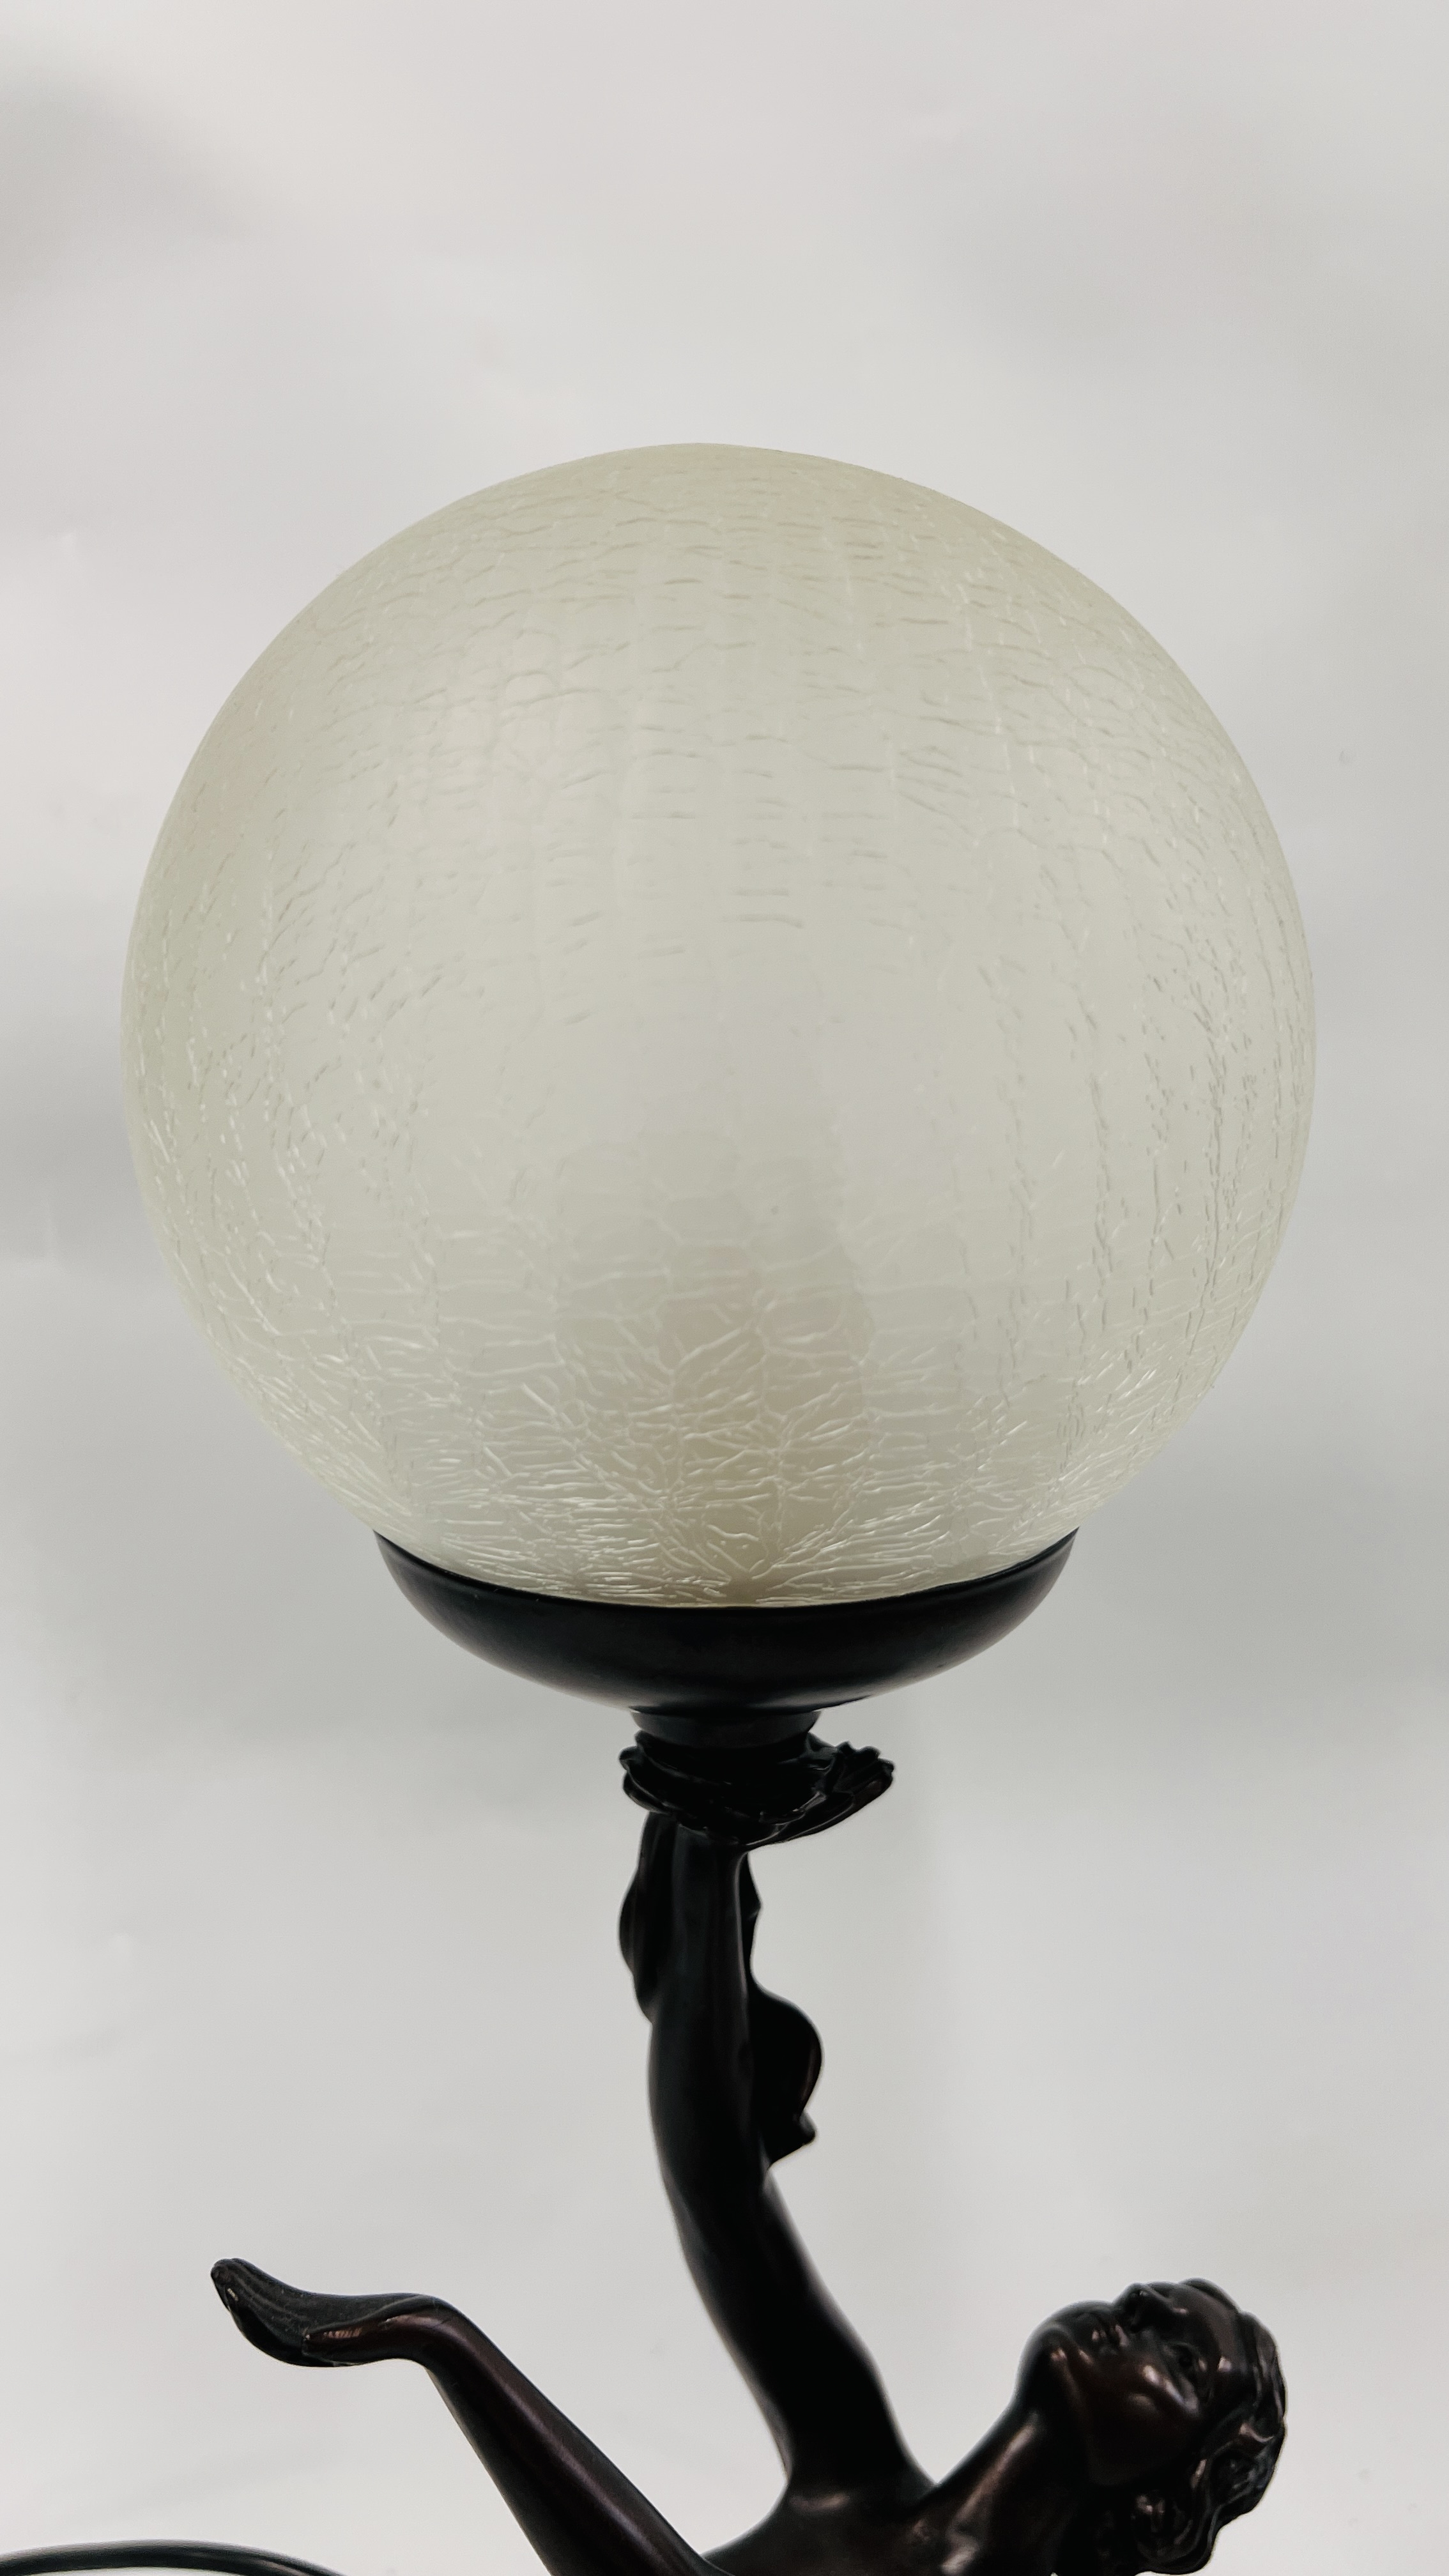 AN ART DECO STYLE FIGURED NUDE TABLE LAMP WITH CRACKLE GLAZED SHADE BY CROSA 1998 HEIGHT 48CM - - Image 5 of 6